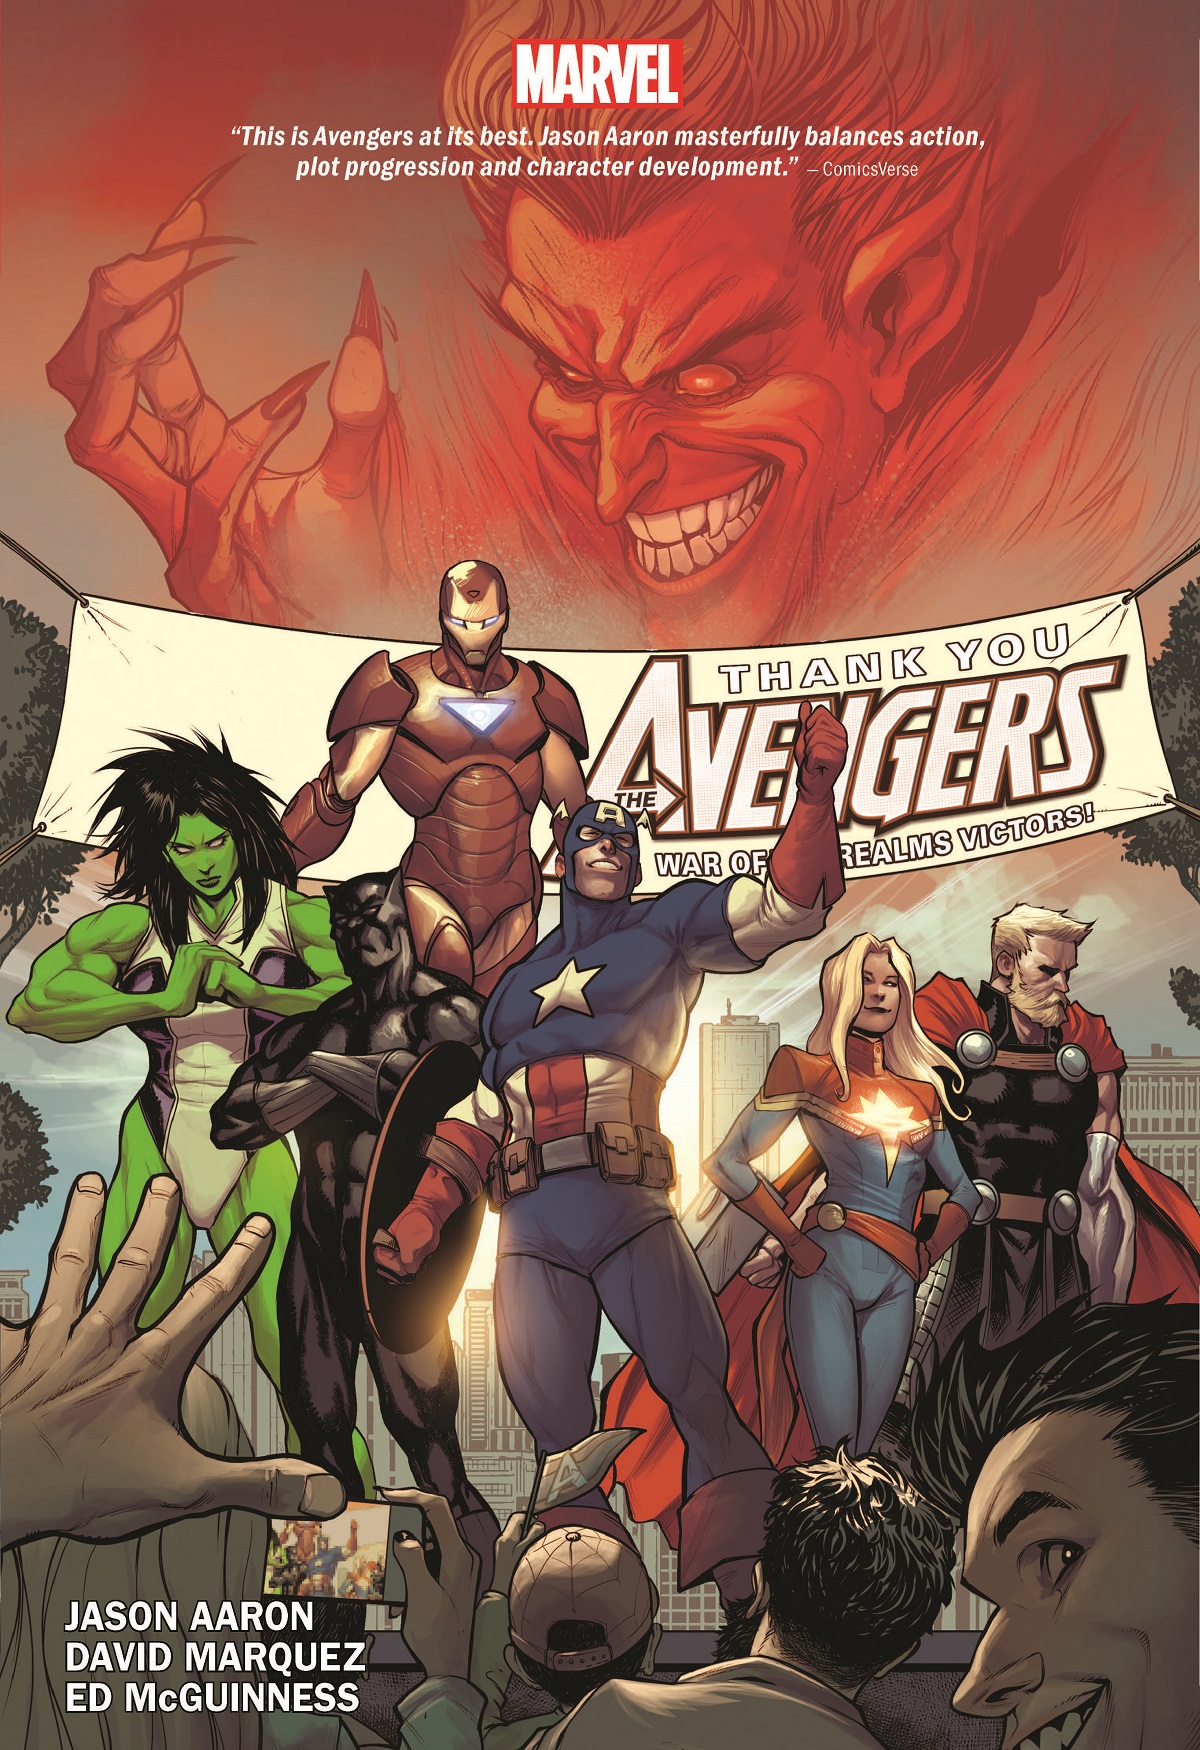 Avengers By Jason Aaron Vol. 2 (Trade Paperback)